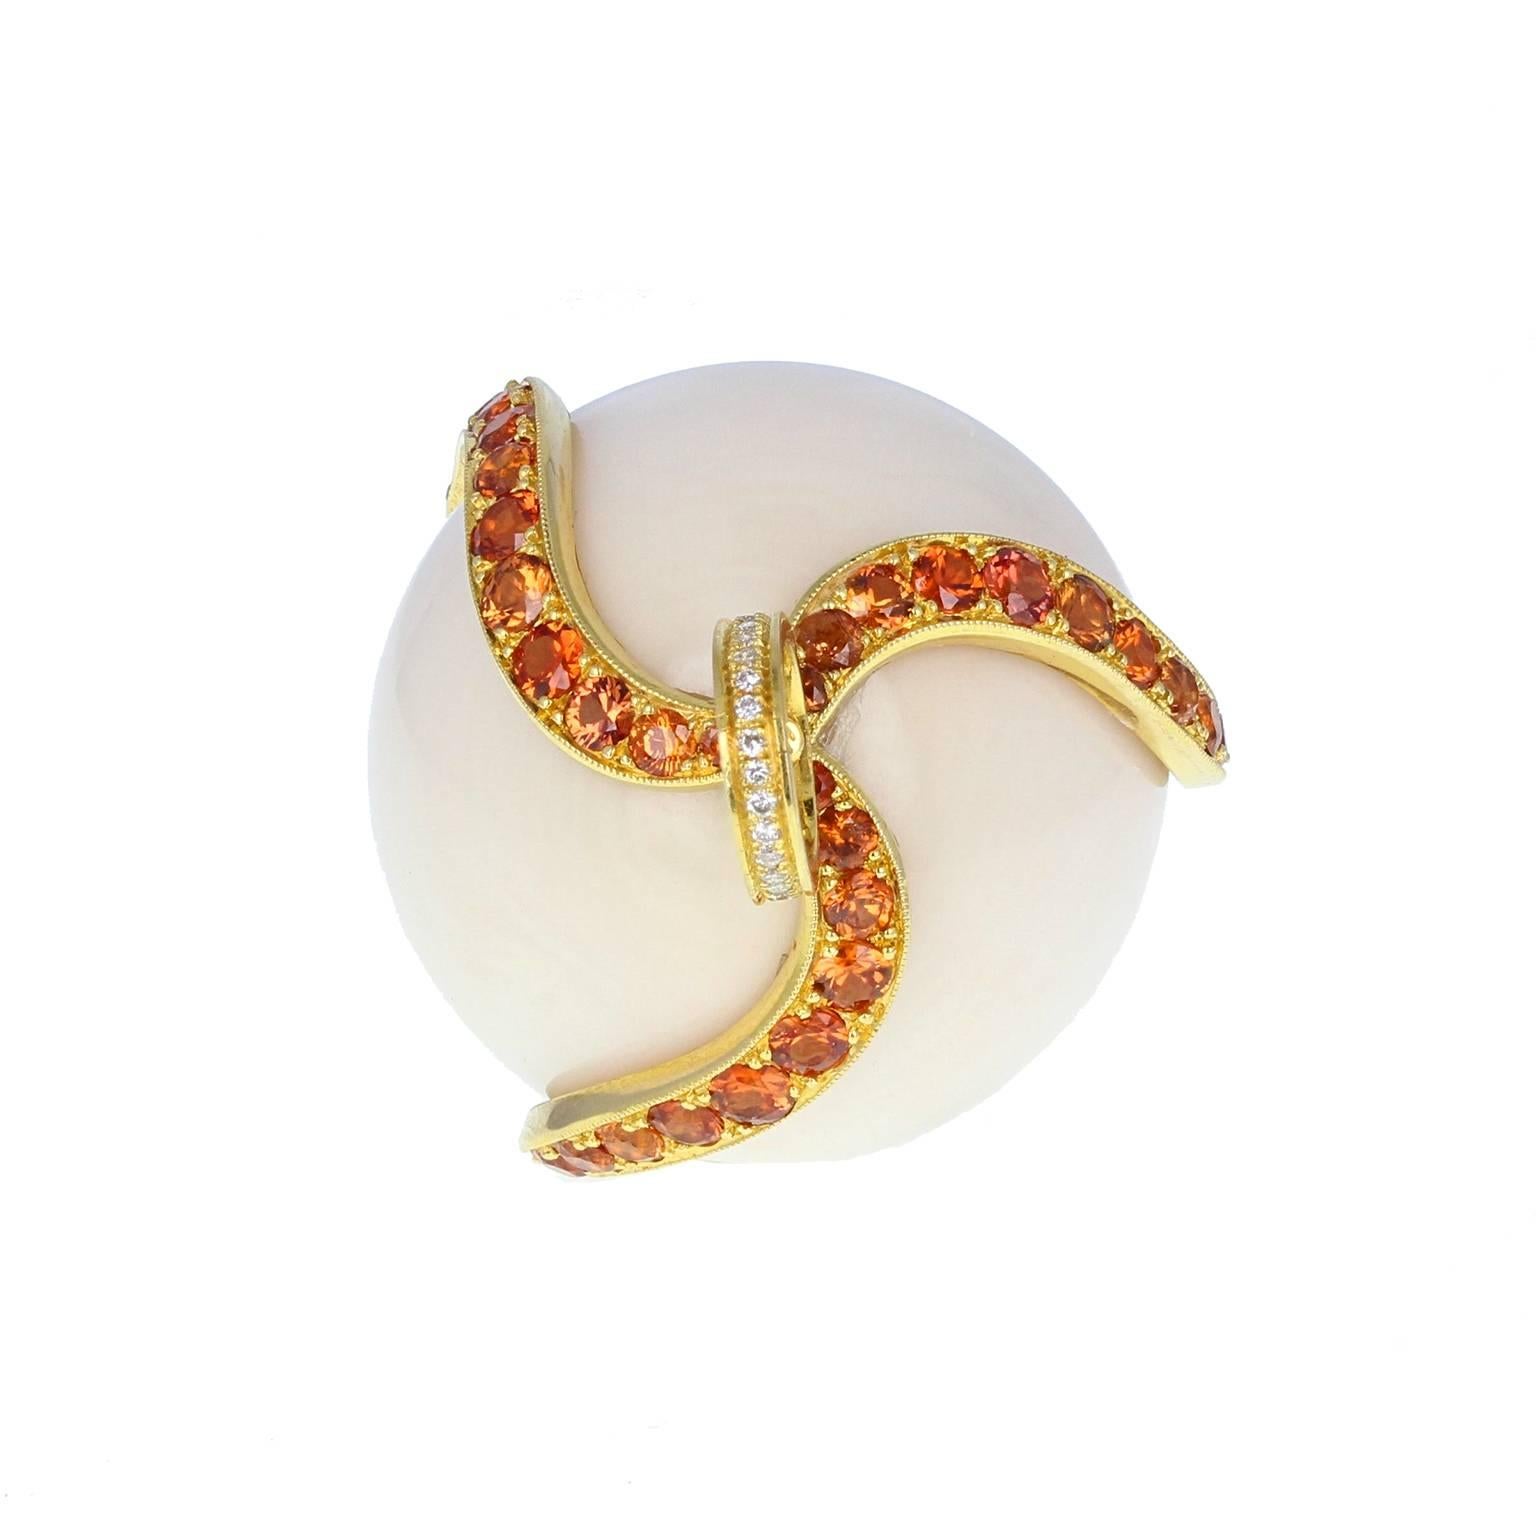 phere of white coral, with some very fine pink veins, held in a three fingered 'claw' of 18 carat gold, pavé set with brilliant-cut fire opals. Large gold bale with, pavé set with diamonds. A particularly striking piece.
Accompanied by a